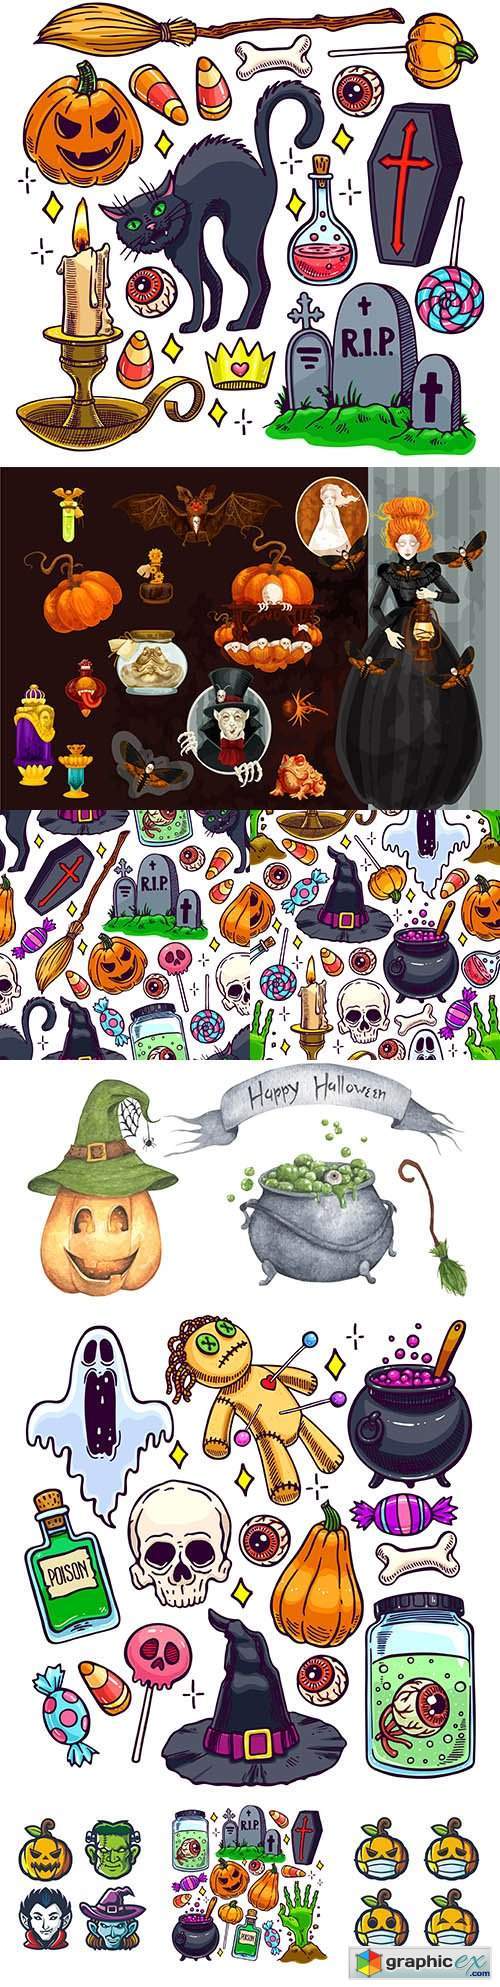 Halloween holiday elements and items painted illustration